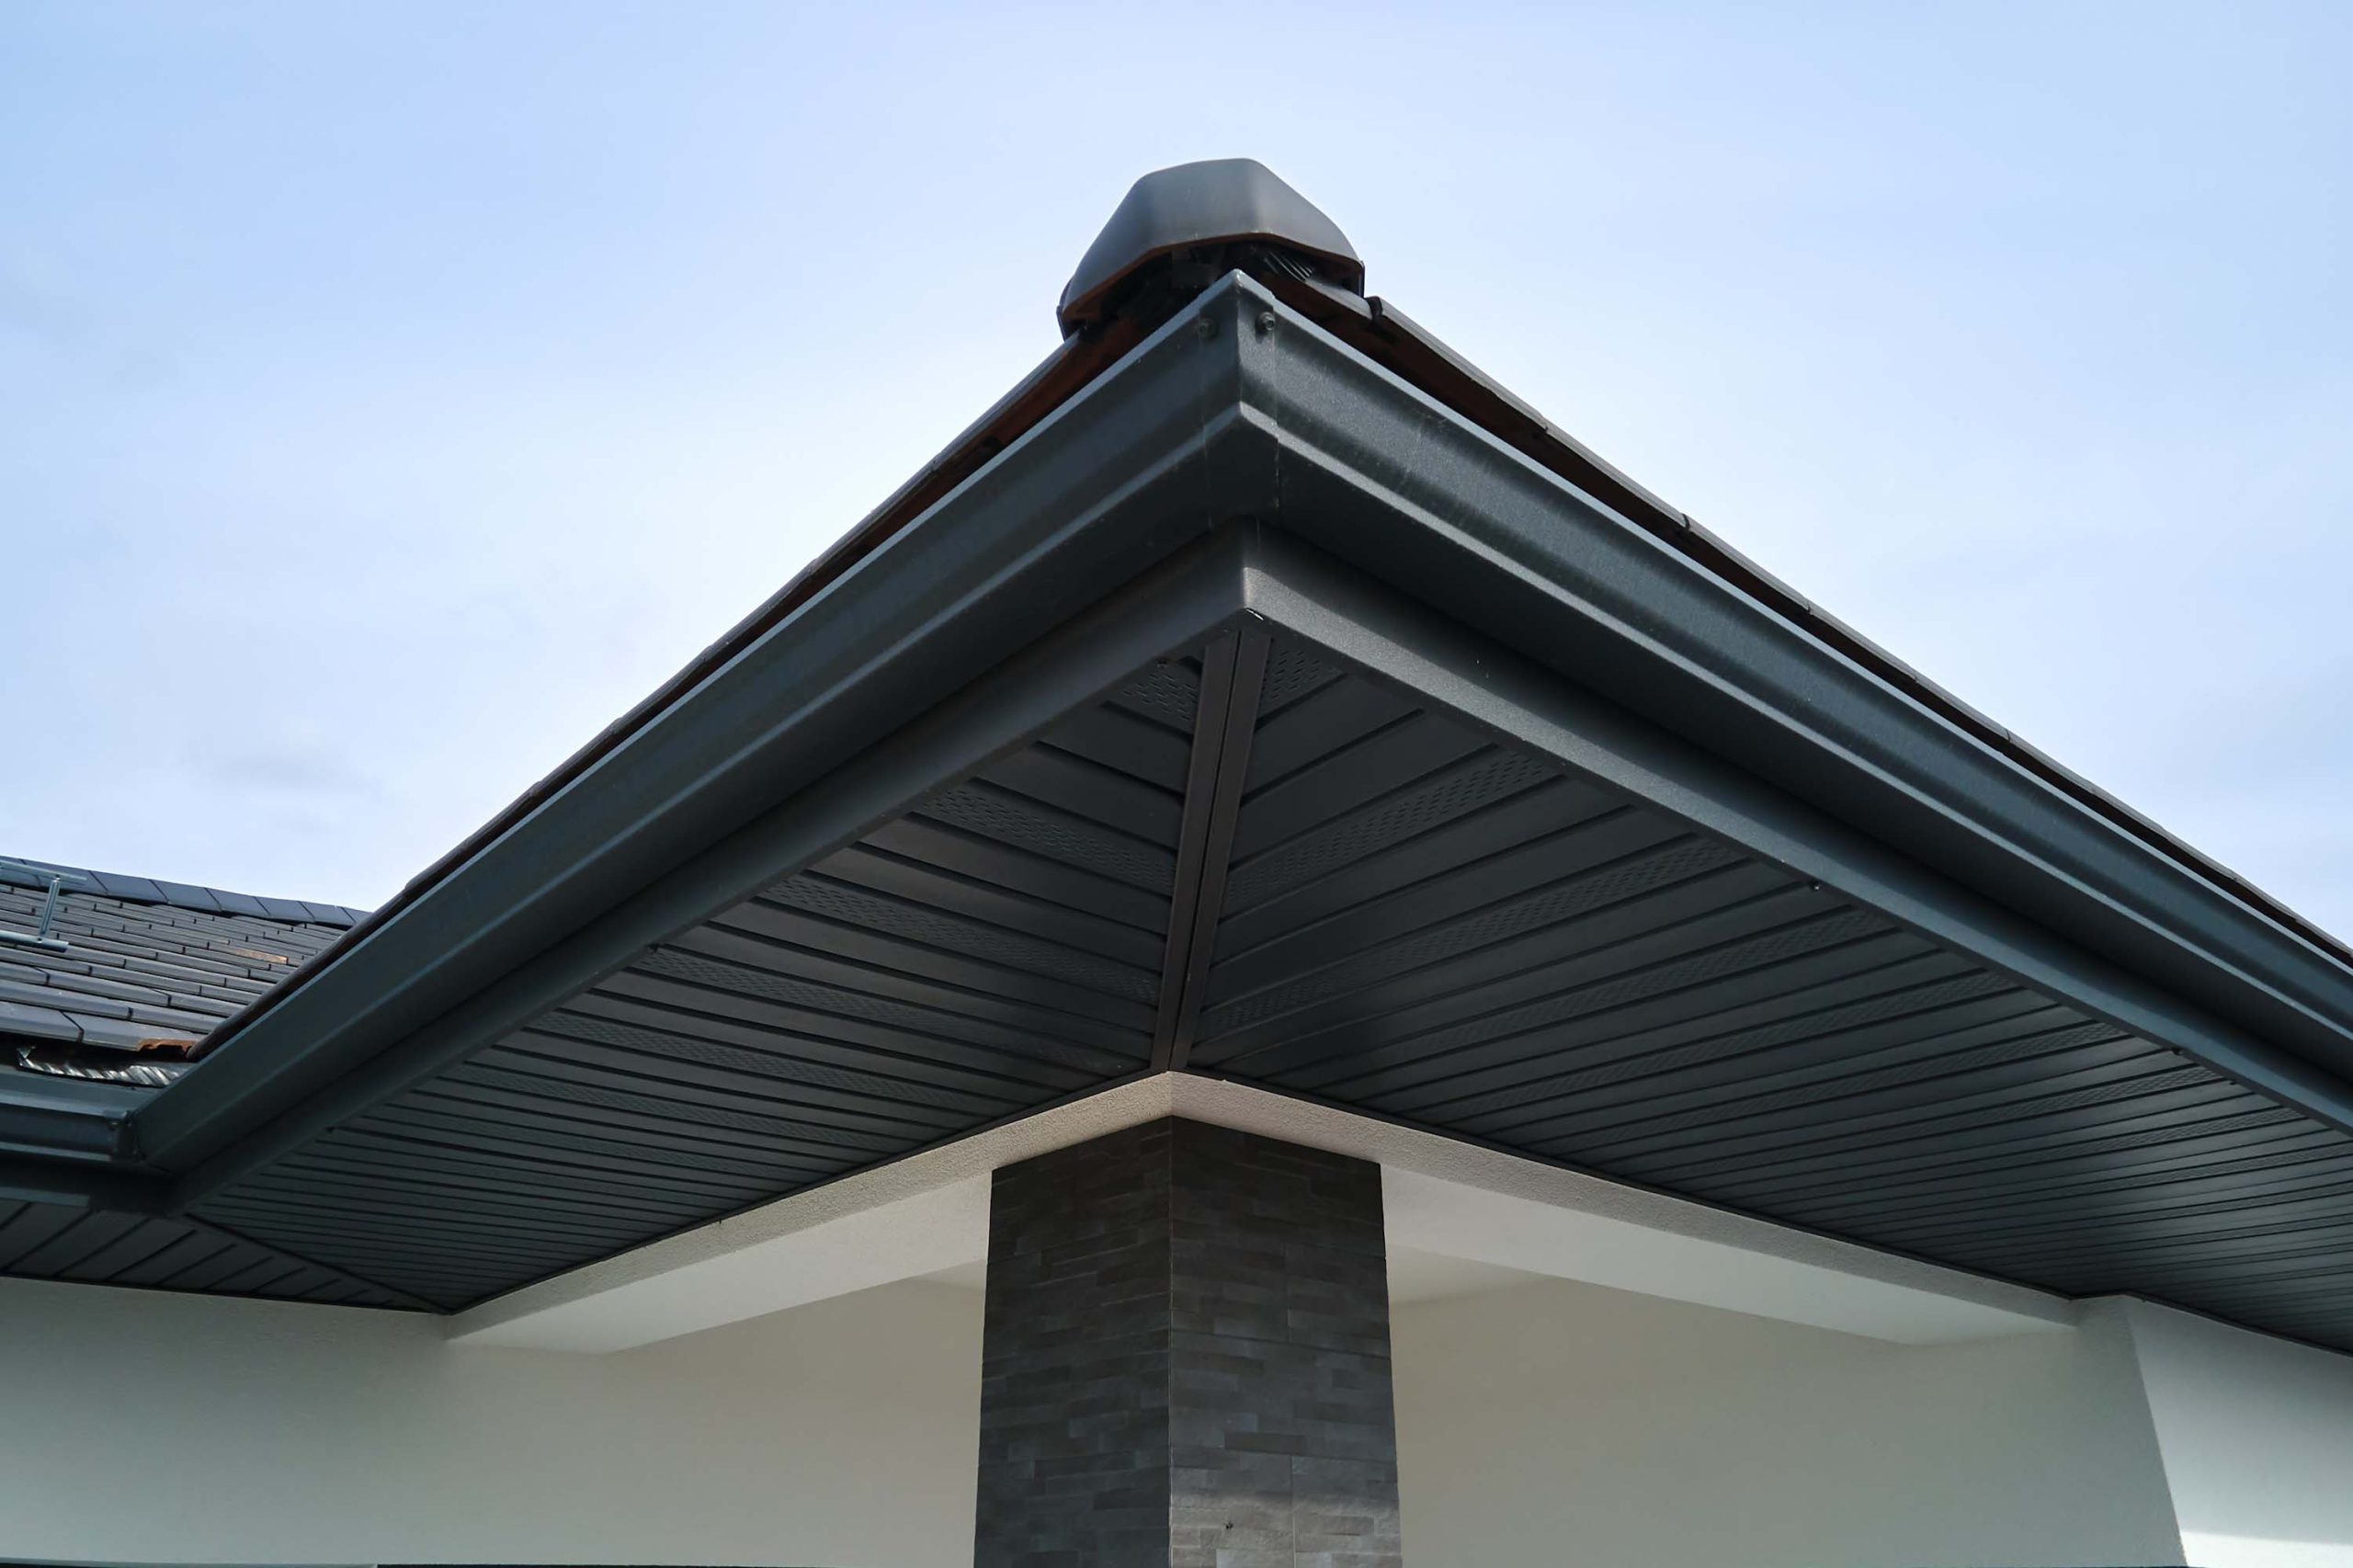 Siding - A&R Roof Services